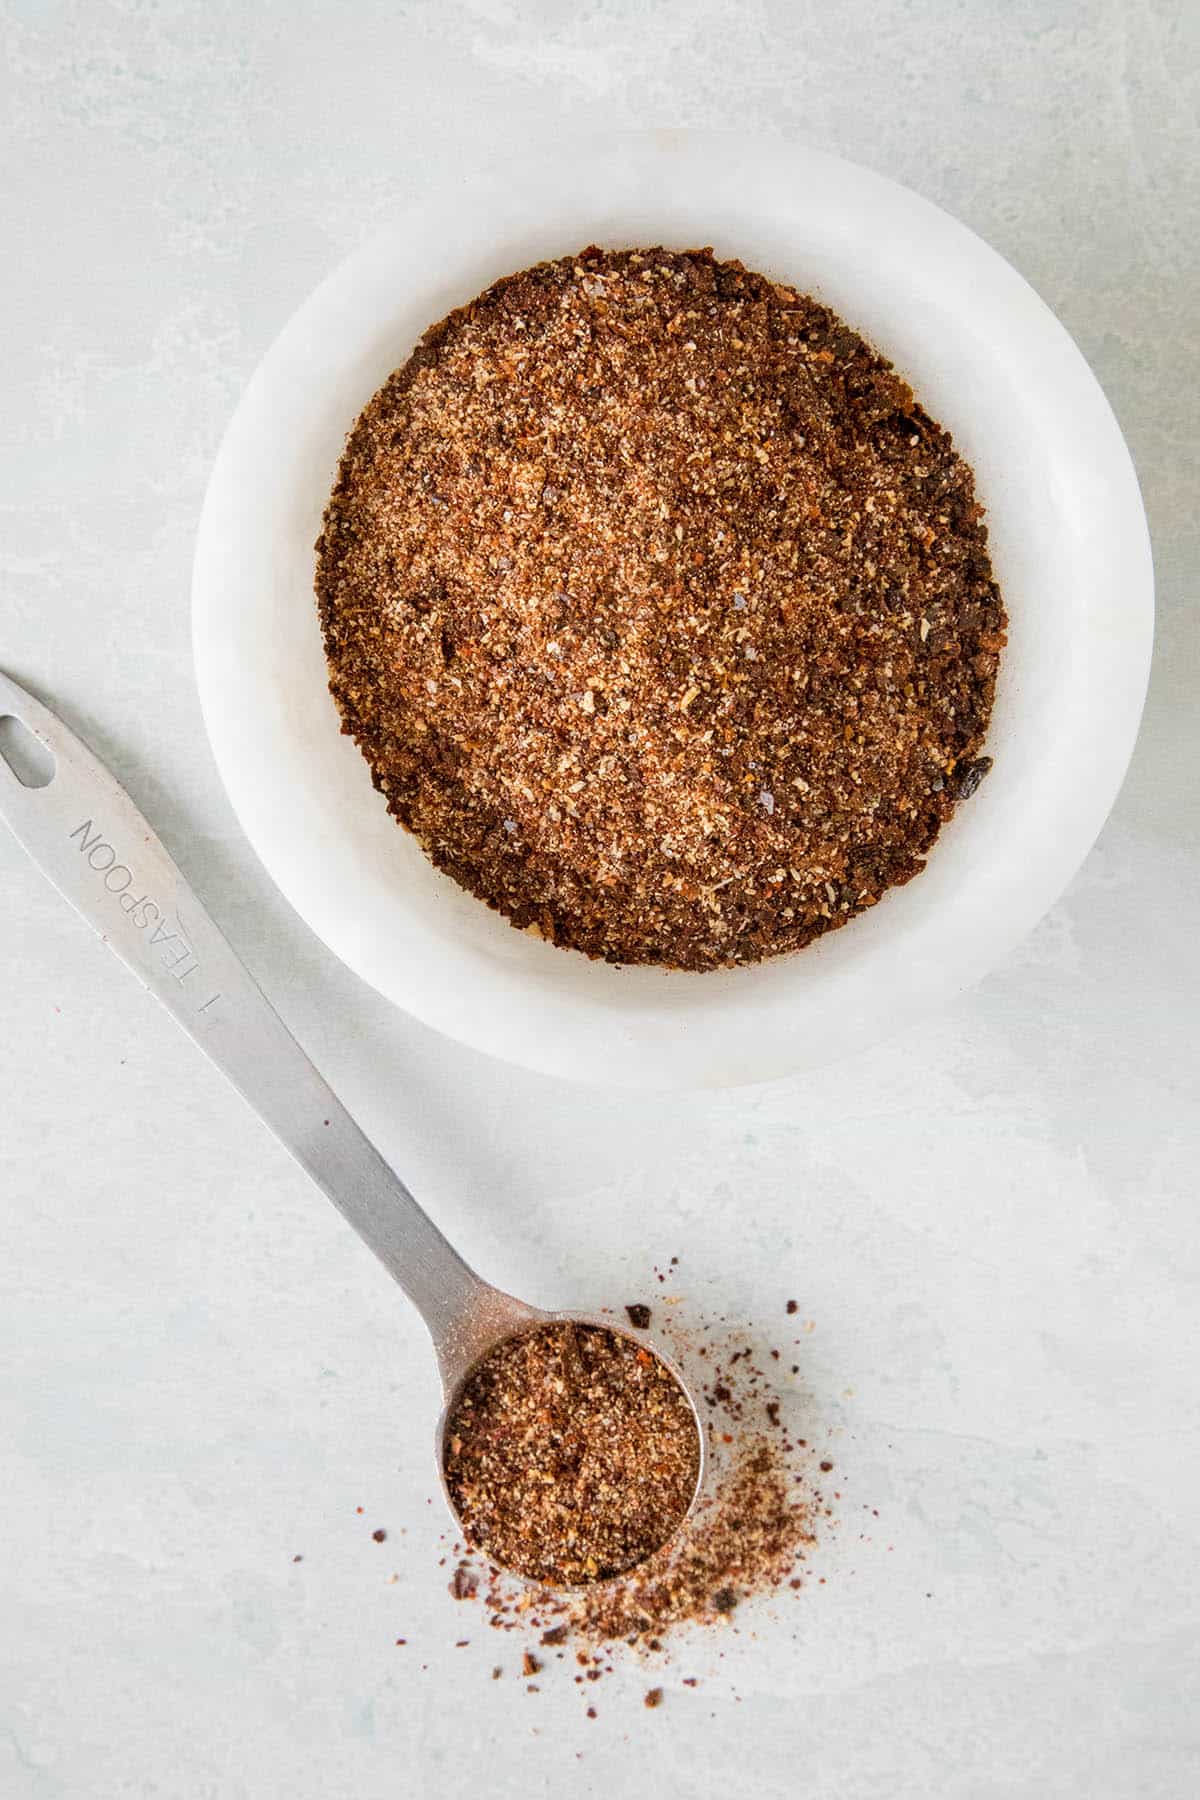 Homemade Chili Powder - In a bowl